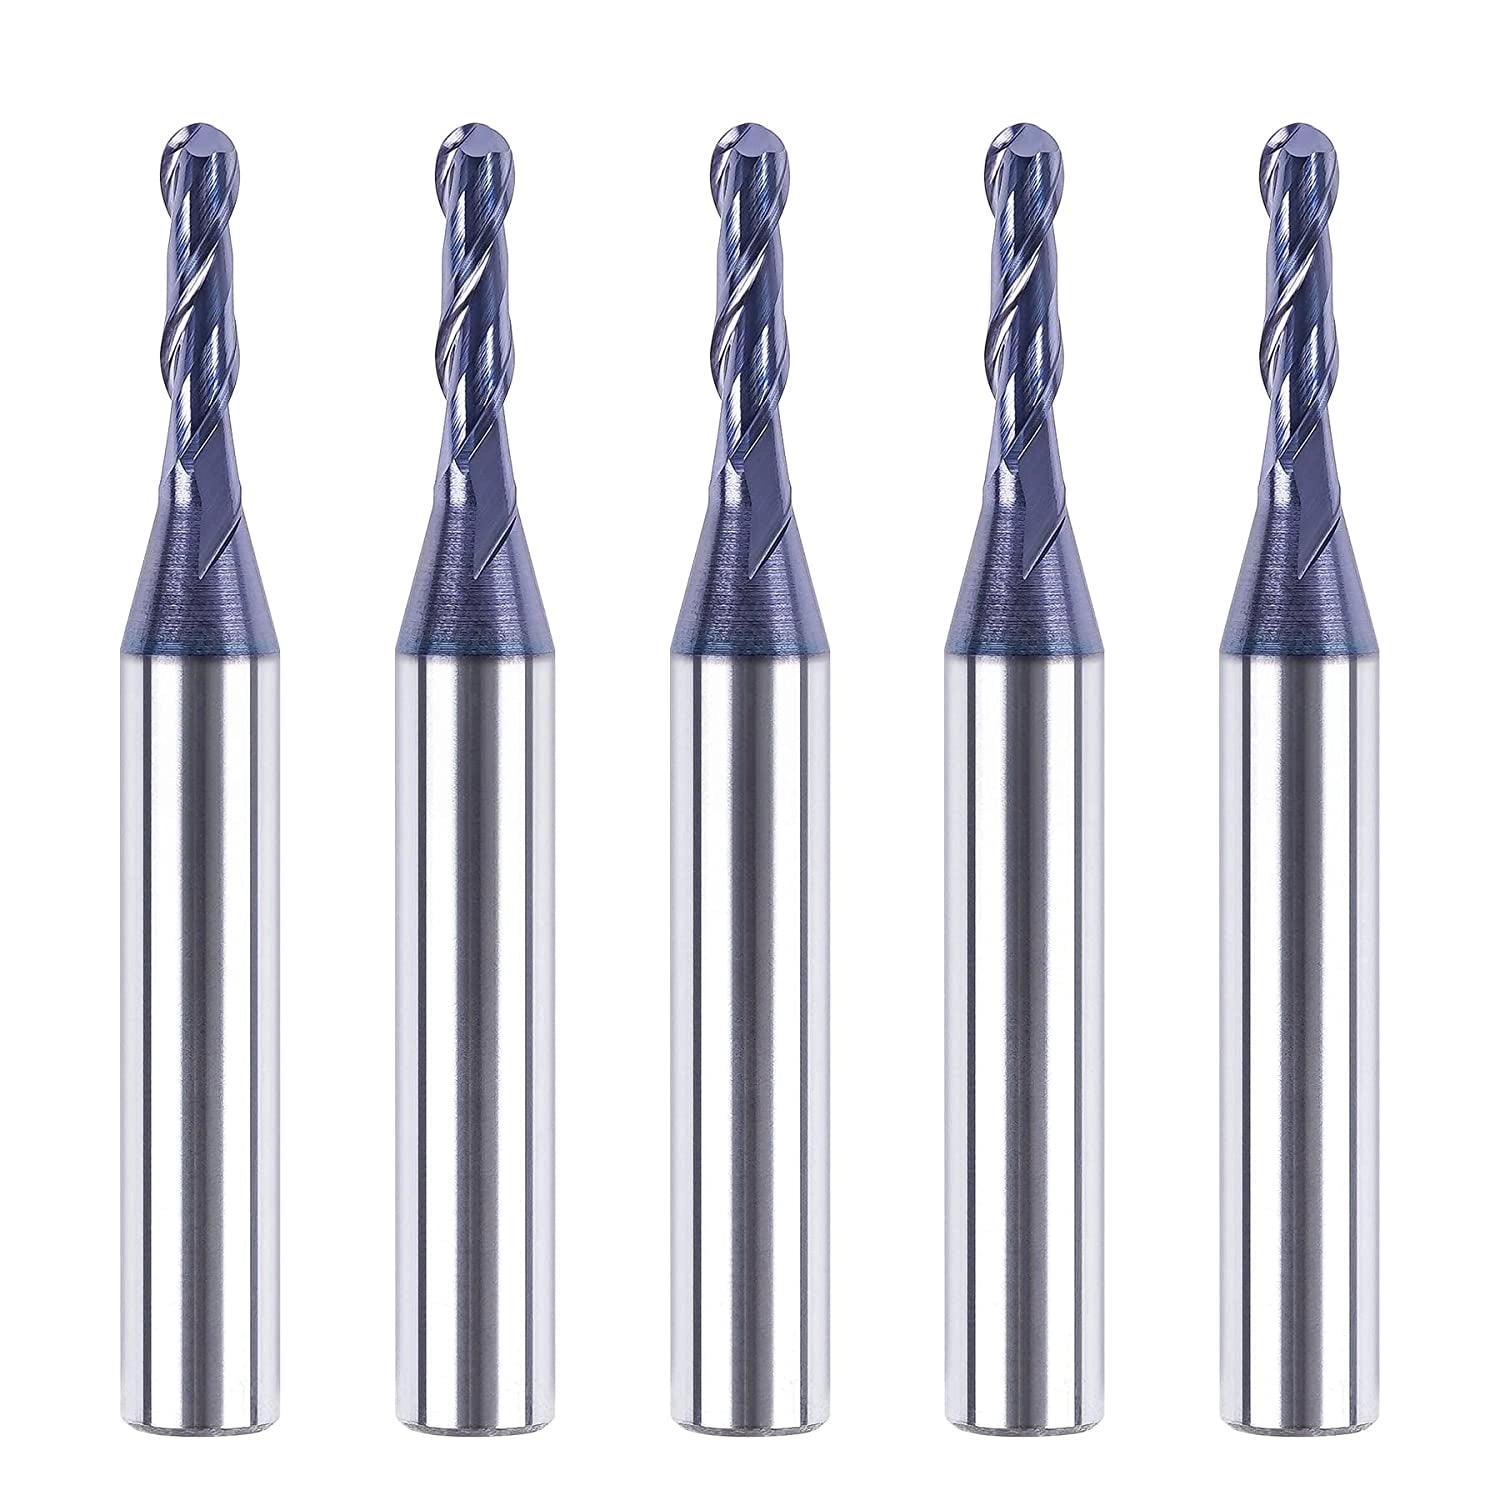 SpeTool 5PCS Ball Nose End Mill 18 Cutting Diameter 14 Shank 2 Flute HRC55 TiAIN Coated Carbide Upcut Router Bits CNC Milling Tool